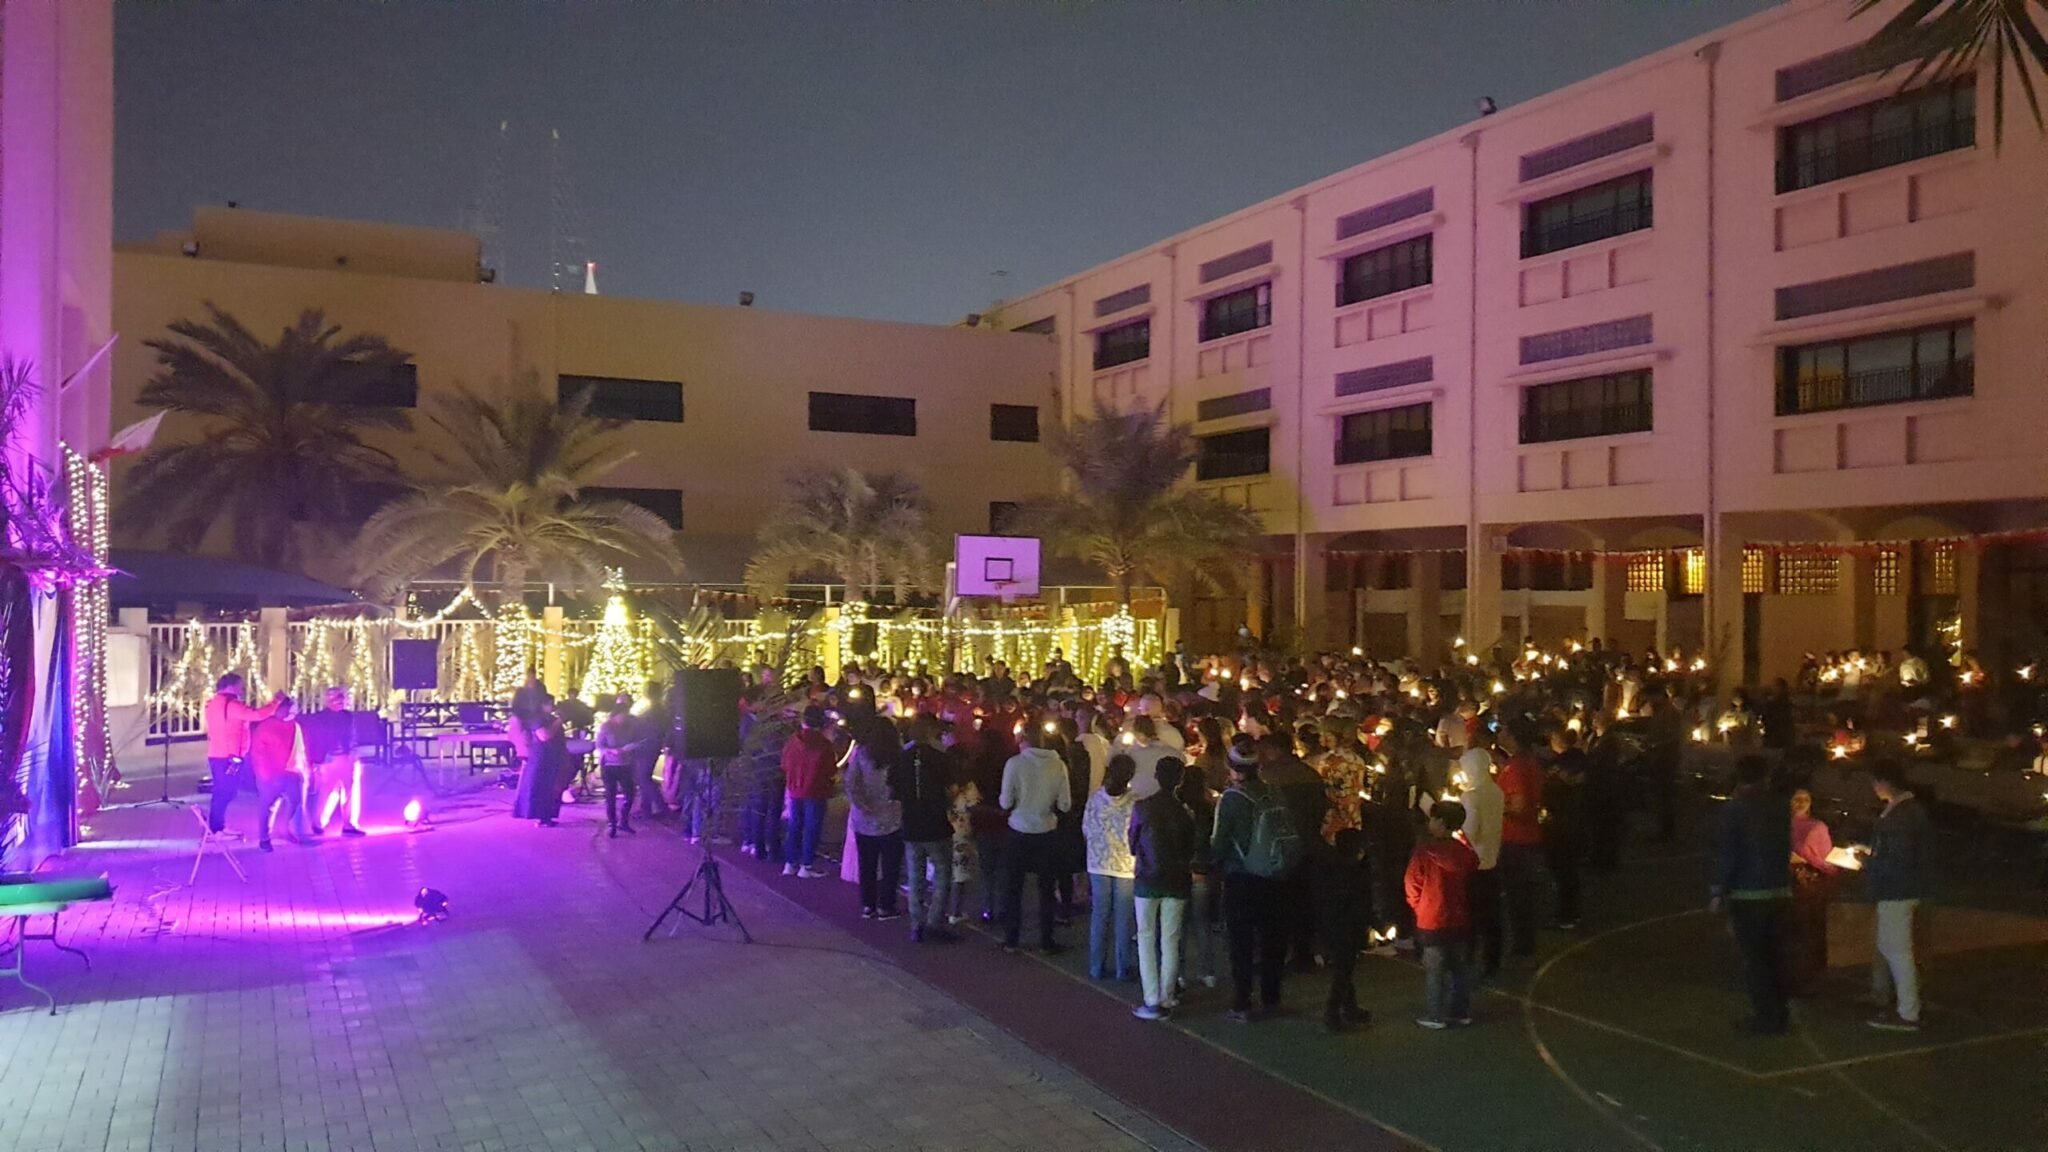 large group of people sing Christmas carols by candlelight in outside courtyard